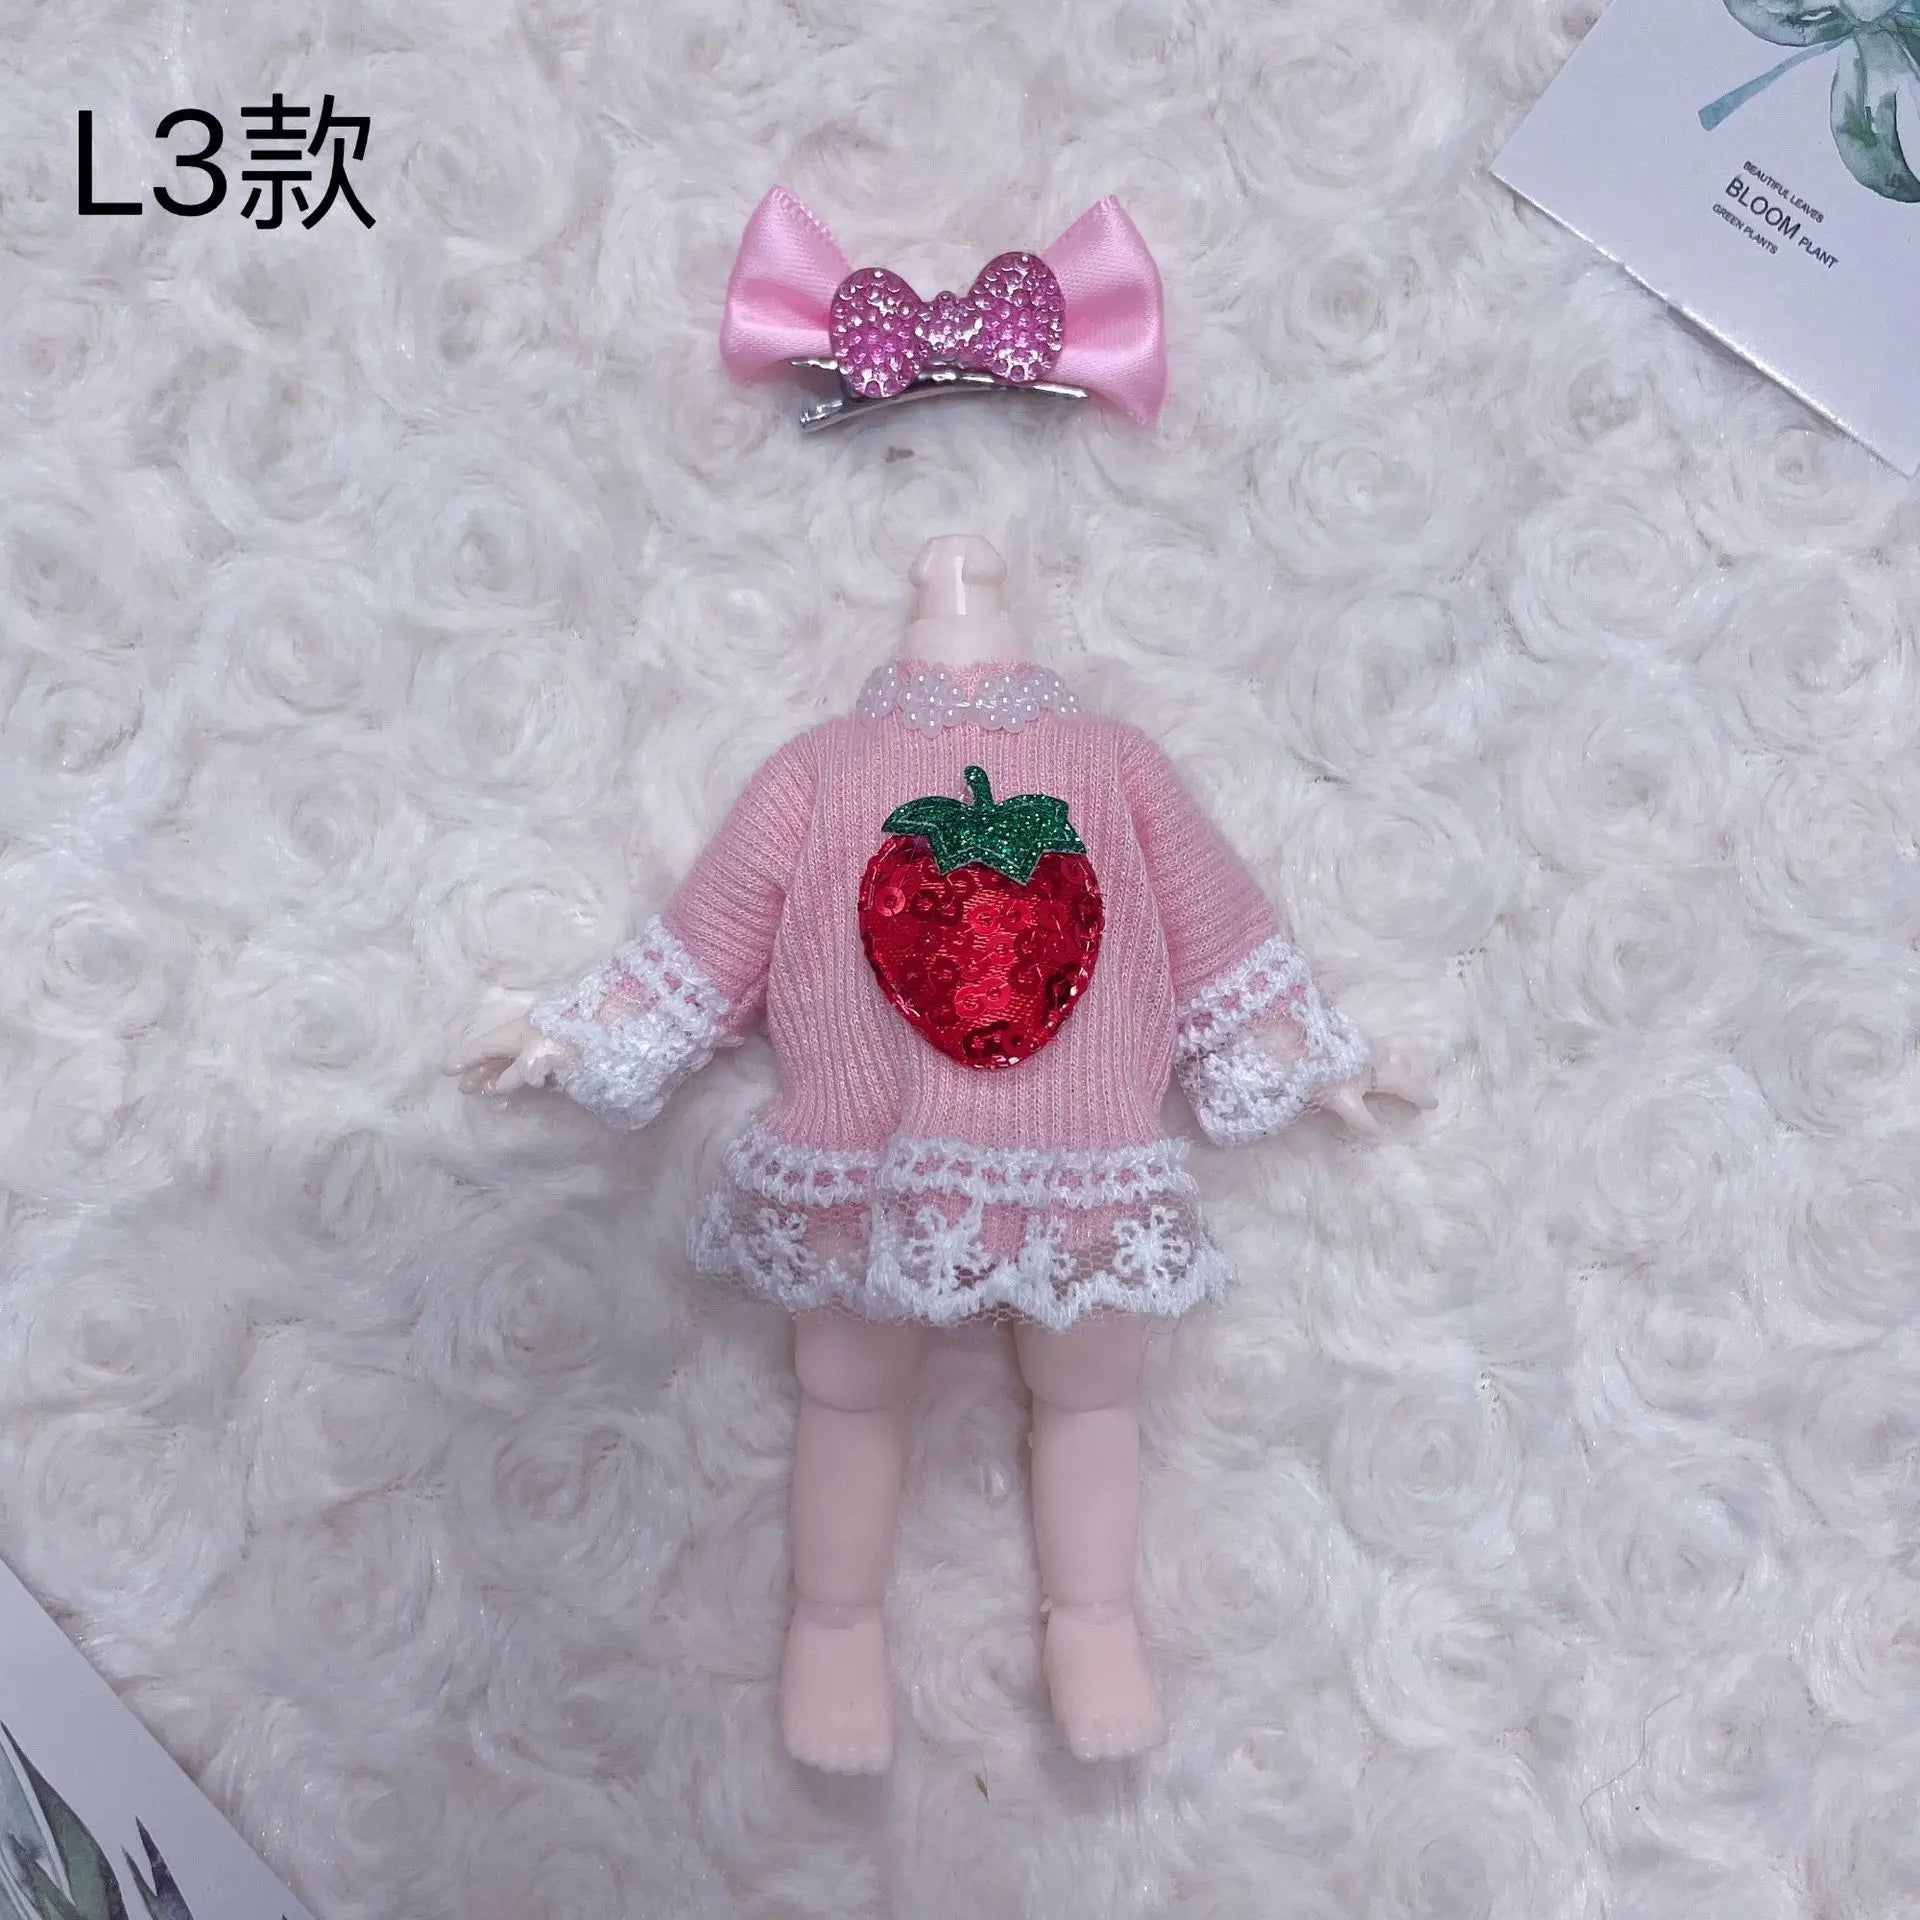 16cm Bjd Doll Clothes High-end Dress Up Can Dress Up Fashion Doll Clothes Skirt Suit Best Gifts for Children DIY Girls Toys